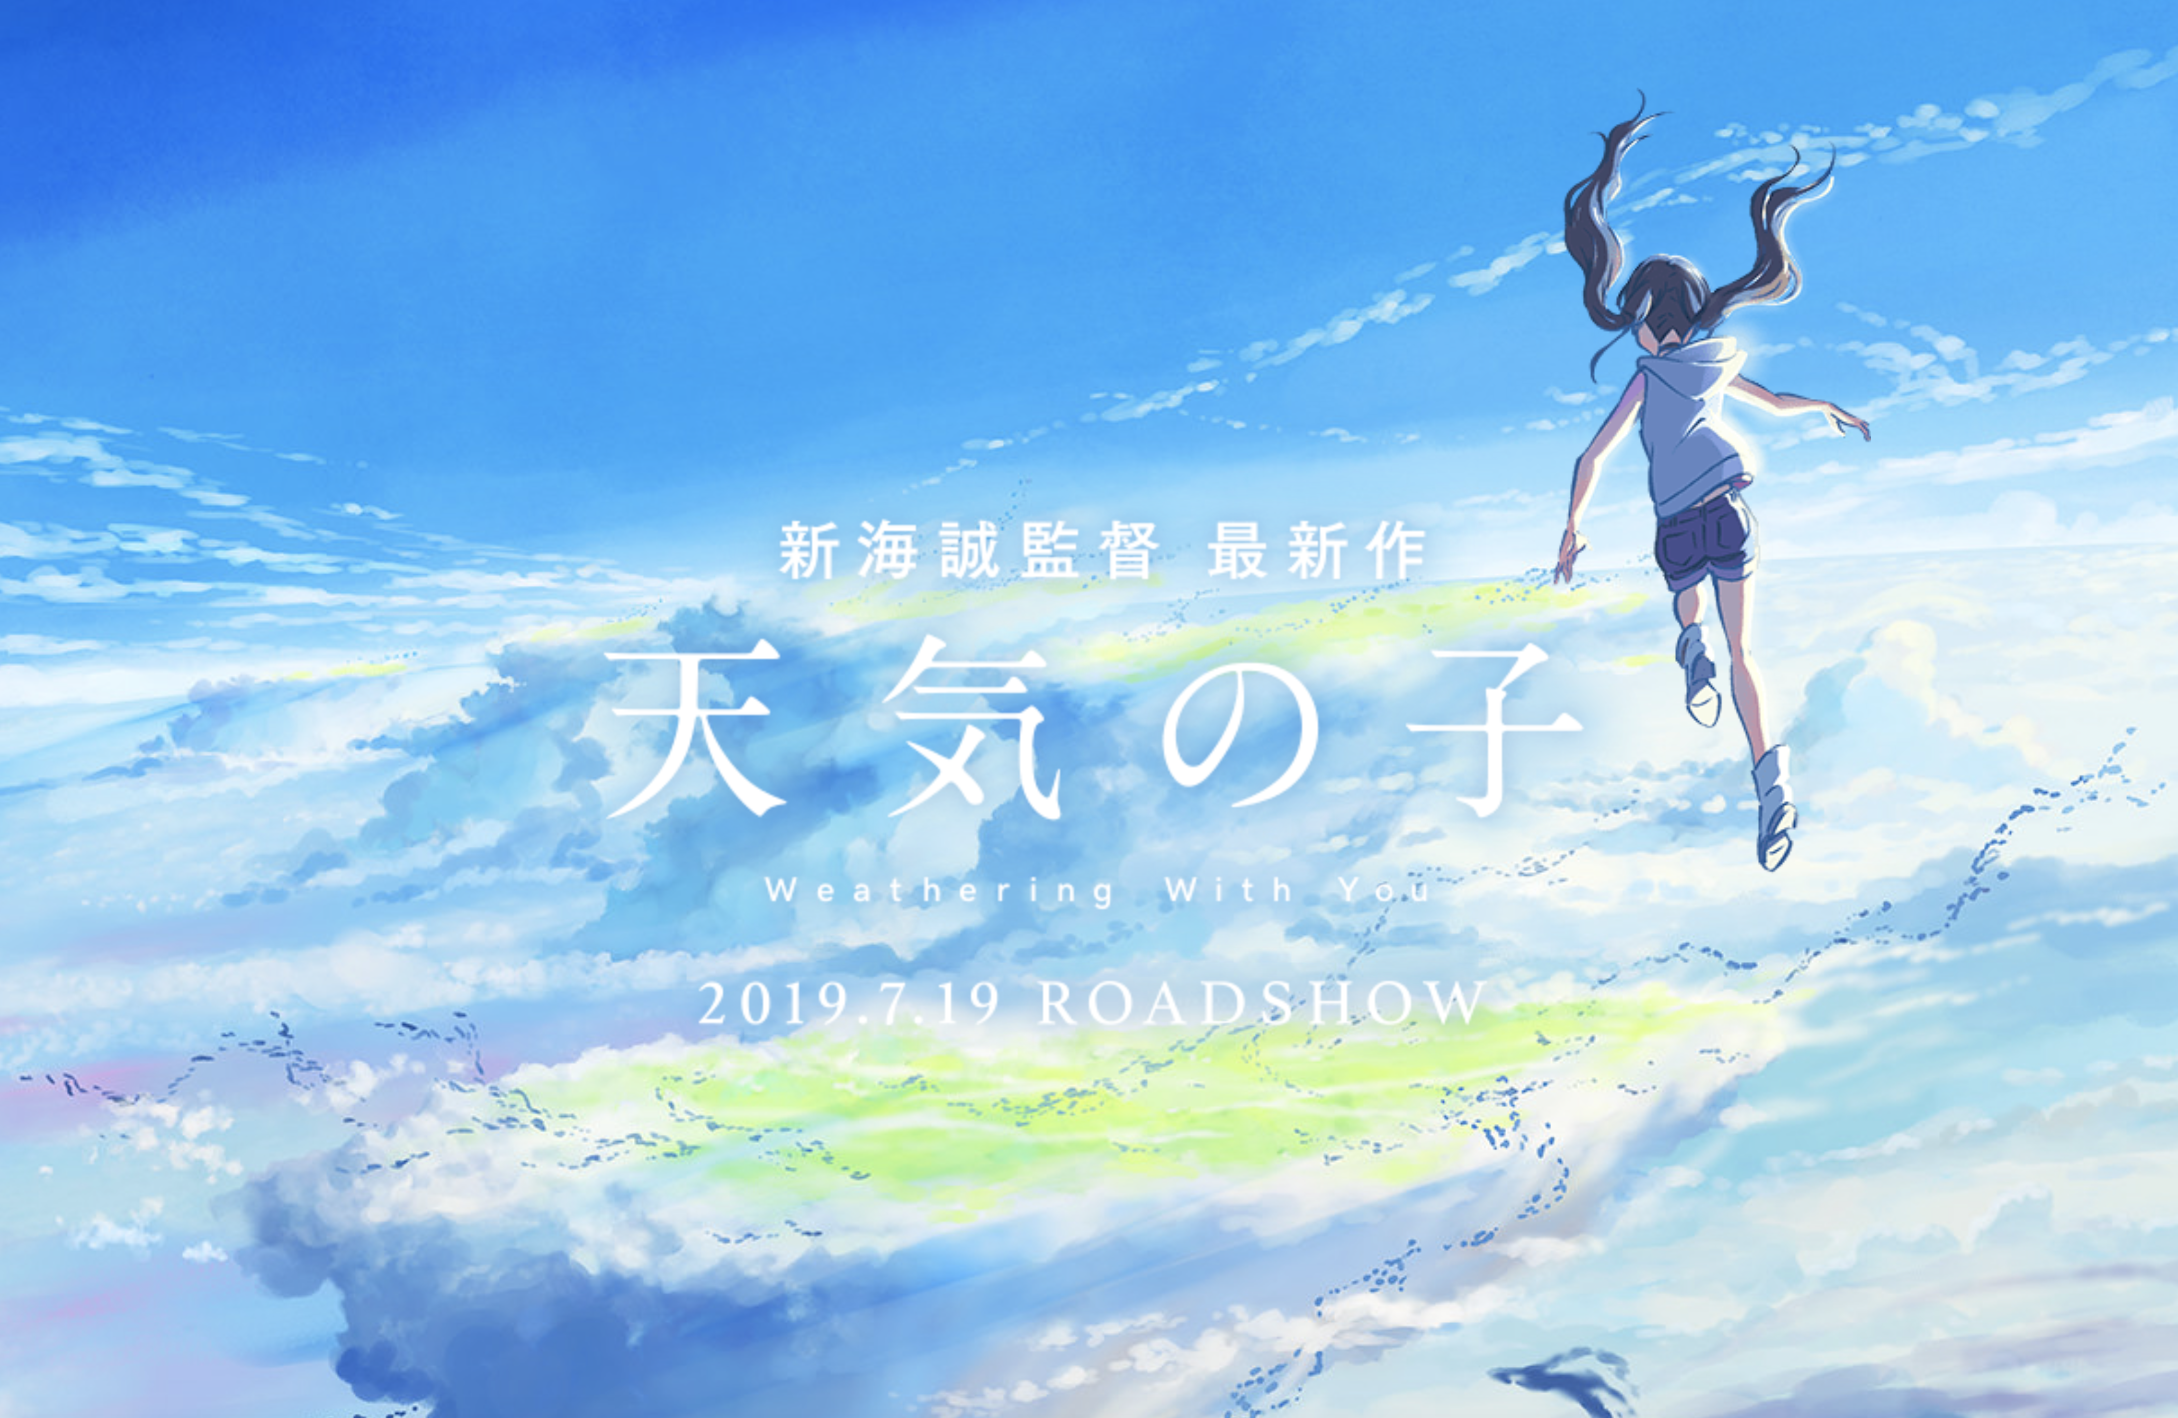 Weathering with you, il nuovo film dell'autore di Your name thumbnail